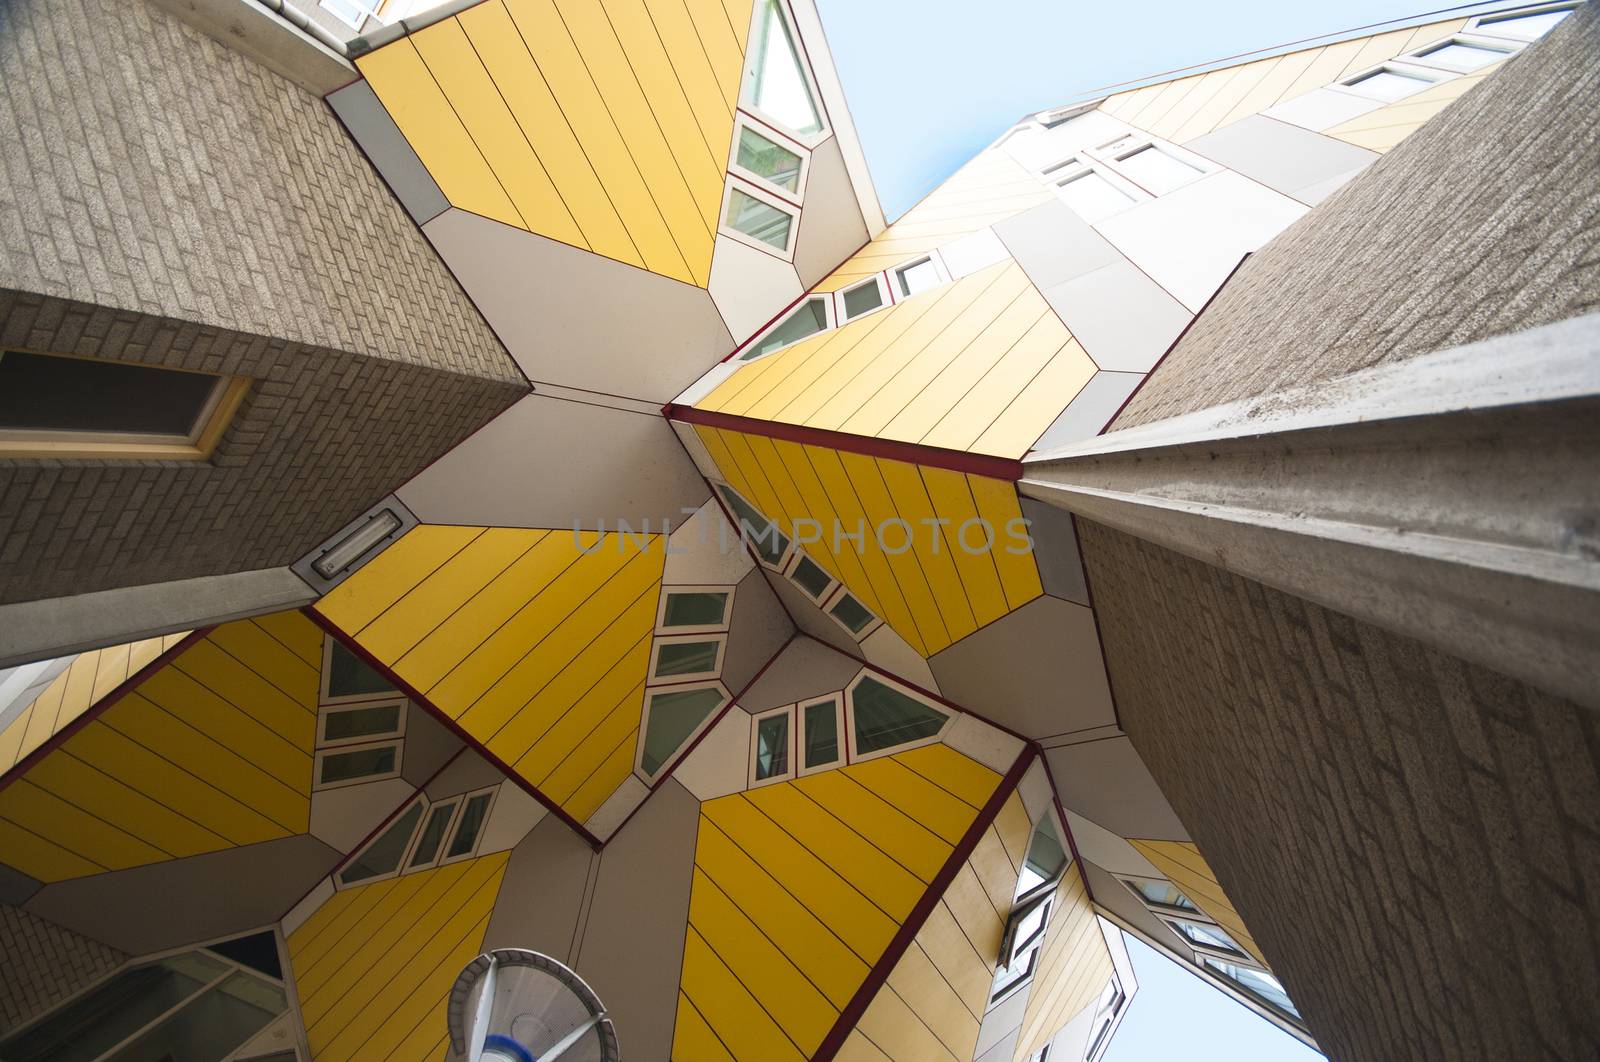 View on the Cube Houses by Piet Blom